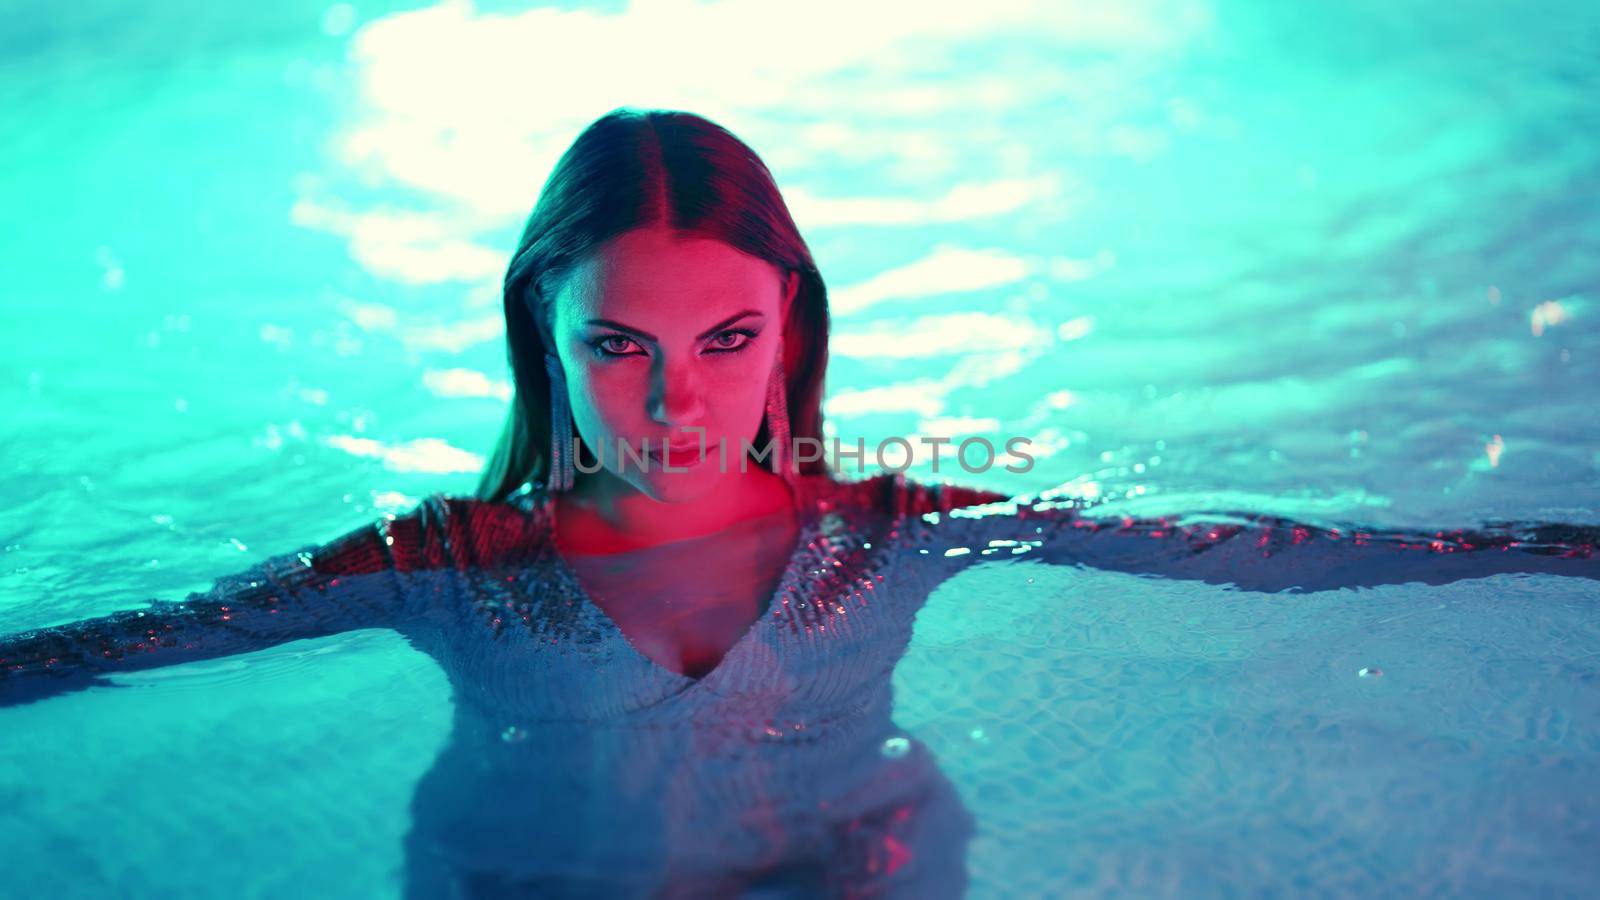 Beautiful woman posing in pool water under neon color light. Party, attractive chic in shining dress enjoying night time. Rich lifestyle, luxury life, influential people. High quality photo